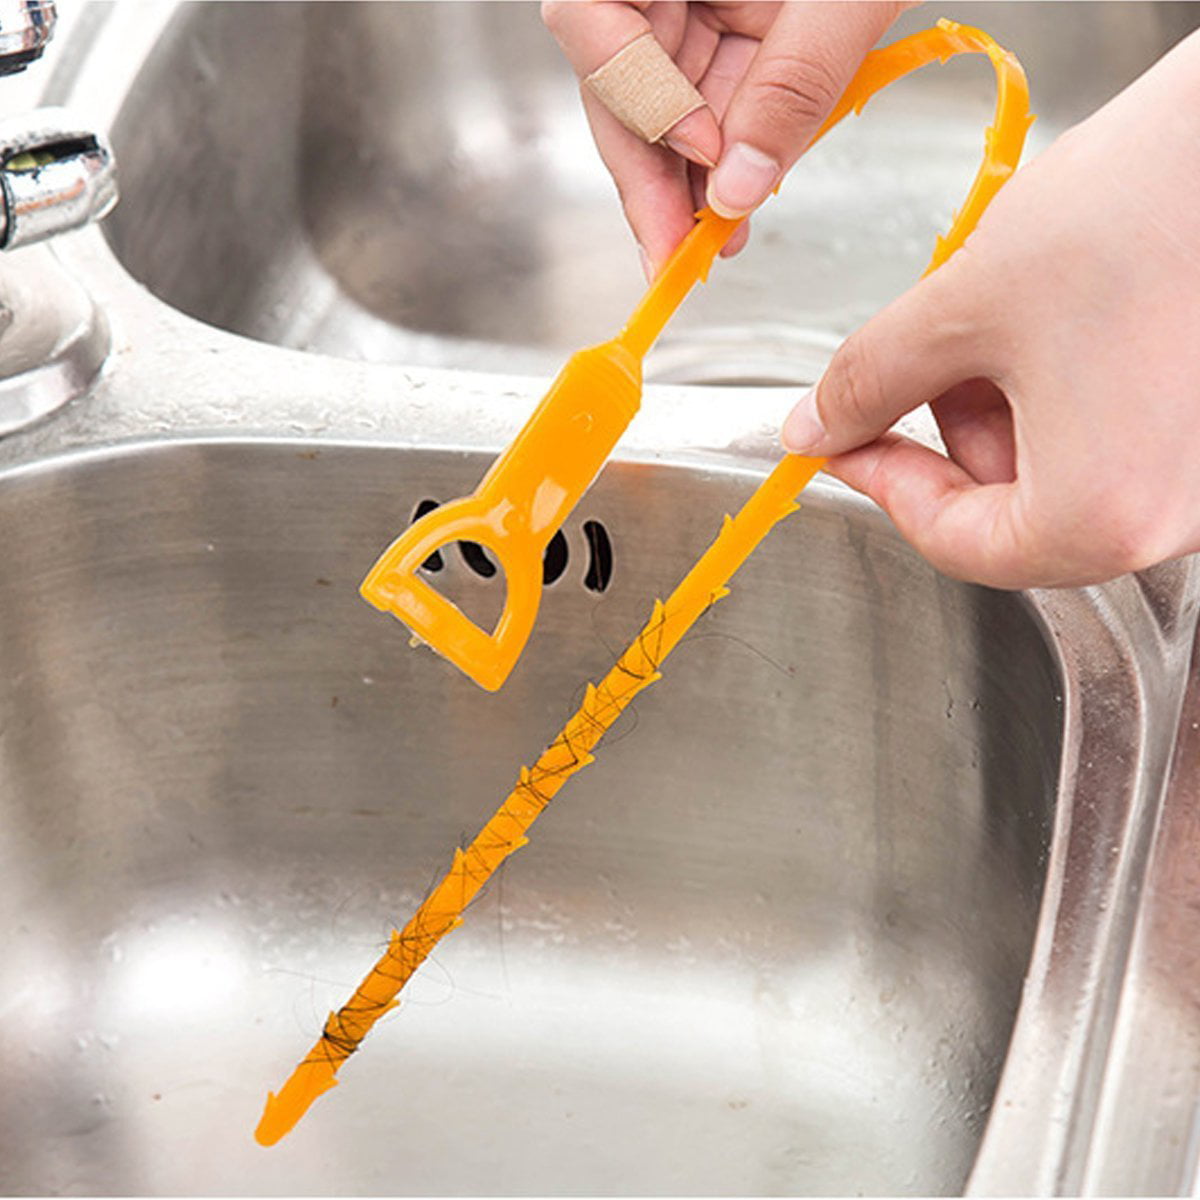  Thinvik 33Ft/10M Drain Snake Plumbing Drain Auger Sink Hair  Clog Remover, Heavy Duty Pipe Clogged Cleaner For Bathtub, Drain, Kitchen  Sink, Sewer with Gloves : Tools & Home Improvement